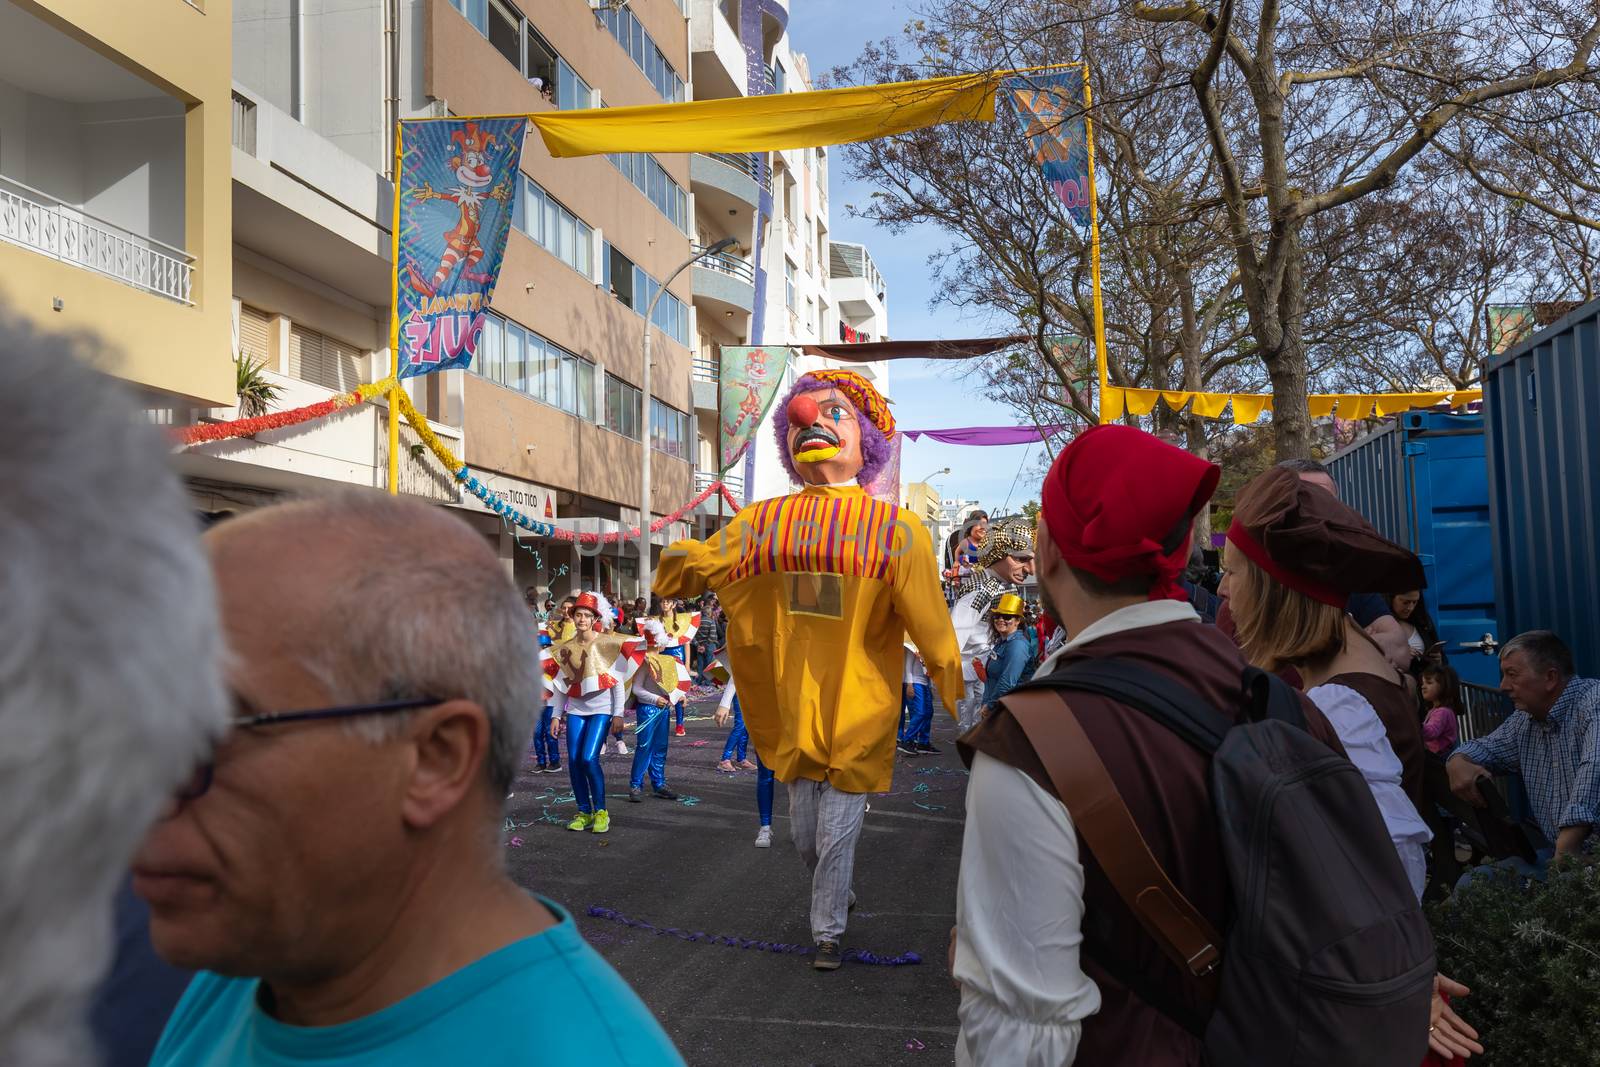 Loule, Portugal - February 25, 2020: Man disguised as a giant in the street in front of the public in the parade of the traditional carnival of Loule city on a February day